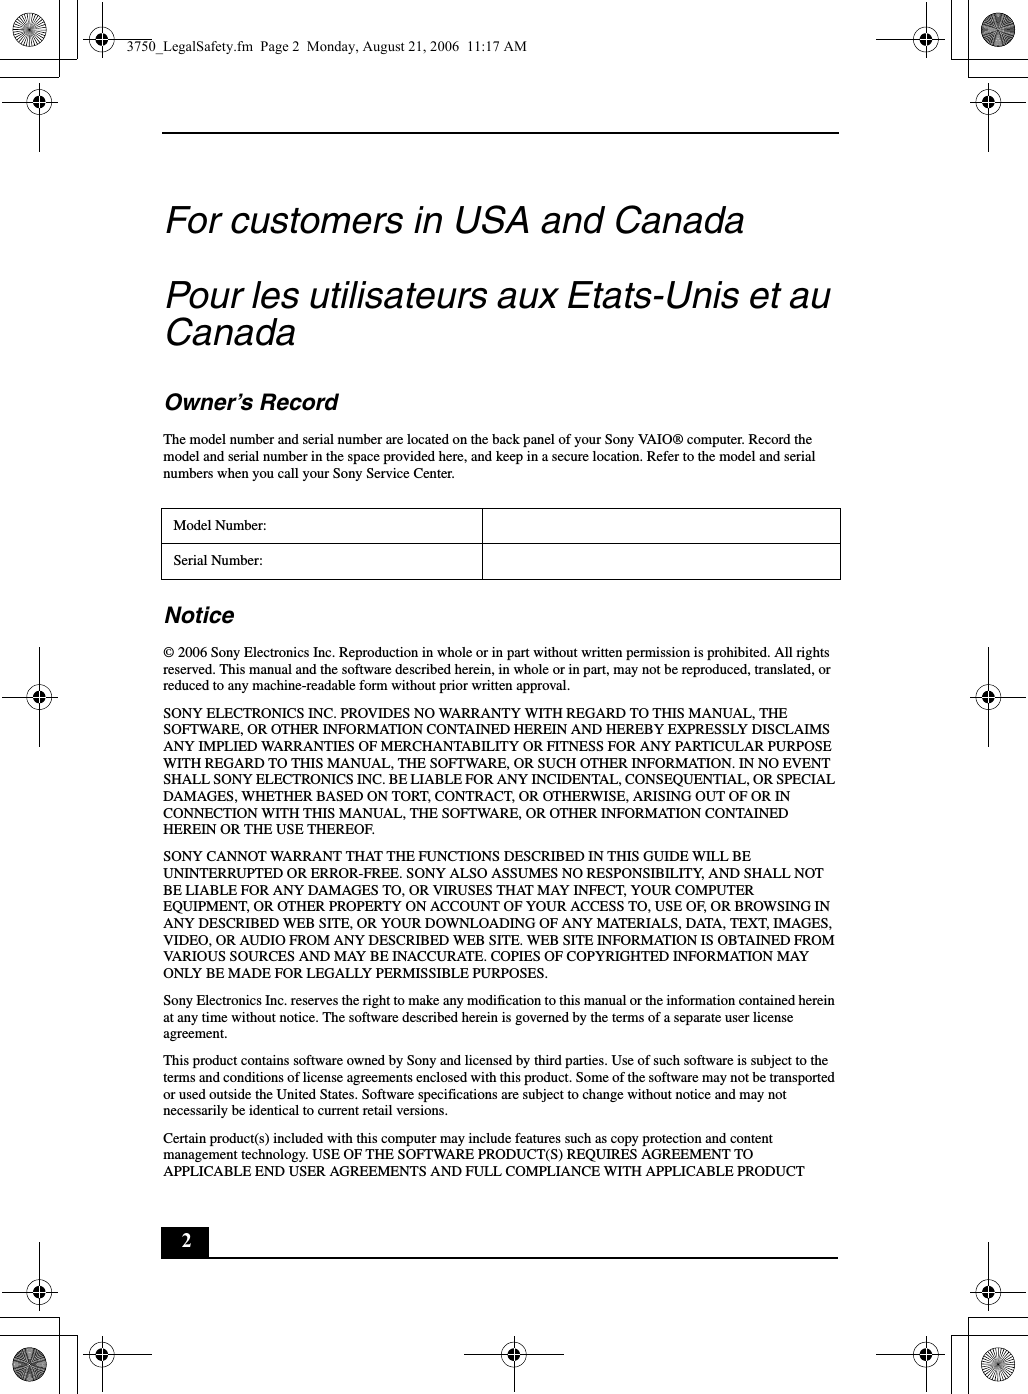 2For customers in USA and CanadaPour les utilisateurs aux Etats-Unis et au CanadaOwner’s RecordThe model number and serial number are located on the back panel of your Sony VAIO® computer. Record the model and serial number in the space provided here, and keep in a secure location. Refer to the model and serial numbers when you call your Sony Service Center.Notice© 2006 Sony Electronics Inc. Reproduction in whole or in part without written permission is prohibited. All rights reserved. This manual and the software described herein, in whole or in part, may not be reproduced, translated, or reduced to any machine-readable form without prior written approval.SONY ELECTRONICS INC. PROVIDES NO WARRANTY WITH REGARD TO THIS MANUAL, THE SOFTWARE, OR OTHER INFORMATION CONTAINED HEREIN AND HEREBY EXPRESSLY DISCLAIMS ANY IMPLIED WARRANTIES OF MERCHANTABILITY OR FITNESS FOR ANY PARTICULAR PURPOSE WITH REGARD TO THIS MANUAL, THE SOFTWARE, OR SUCH OTHER INFORMATION. IN NO EVENT SHALL SONY ELECTRONICS INC. BE LIABLE FOR ANY INCIDENTAL, CONSEQUENTIAL, OR SPECIAL DAMAGES, WHETHER BASED ON TORT, CONTRACT, OR OTHERWISE, ARISING OUT OF OR IN CONNECTION WITH THIS MANUAL, THE SOFTWARE, OR OTHER INFORMATION CONTAINED HEREIN OR THE USE THEREOF.SONY CANNOT WARRANT THAT THE FUNCTIONS DESCRIBED IN THIS GUIDE WILL BE UNINTERRUPTED OR ERROR-FREE. SONY ALSO ASSUMES NO RESPONSIBILITY, AND SHALL NOT BE LIABLE FOR ANY DAMAGES TO, OR VIRUSES THAT MAY INFECT, YOUR COMPUTER EQUIPMENT, OR OTHER PROPERTY ON ACCOUNT OF YOUR ACCESS TO, USE OF, OR BROWSING IN ANY DESCRIBED WEB SITE, OR YOUR DOWNLOADING OF ANY MATERIALS, DATA, TEXT, IMAGES, VIDEO, OR AUDIO FROM ANY DESCRIBED WEB SITE. WEB SITE INFORMATION IS OBTAINED FROM VARIOUS SOURCES AND MAY BE INACCURATE. COPIES OF COPYRIGHTED INFORMATION MAY ONLY BE MADE FOR LEGALLY PERMISSIBLE PURPOSES.Sony Electronics Inc. reserves the right to make any modification to this manual or the information contained herein at any time without notice. The software described herein is governed by the terms of a separate user license agreement.This product contains software owned by Sony and licensed by third parties. Use of such software is subject to the terms and conditions of license agreements enclosed with this product. Some of the software may not be transported or used outside the United States. Software specifications are subject to change without notice and may not necessarily be identical to current retail versions.Certain product(s) included with this computer may include features such as copy protection and content management technology. USE OF THE SOFTWARE PRODUCT(S) REQUIRES AGREEMENT TO APPLICABLE END USER AGREEMENTS AND FULL COMPLIANCE WITH APPLICABLE PRODUCT Model Number:Serial Number:3750_LegalSafety.fm  Page 2  Monday, August 21, 2006  11:17 AM